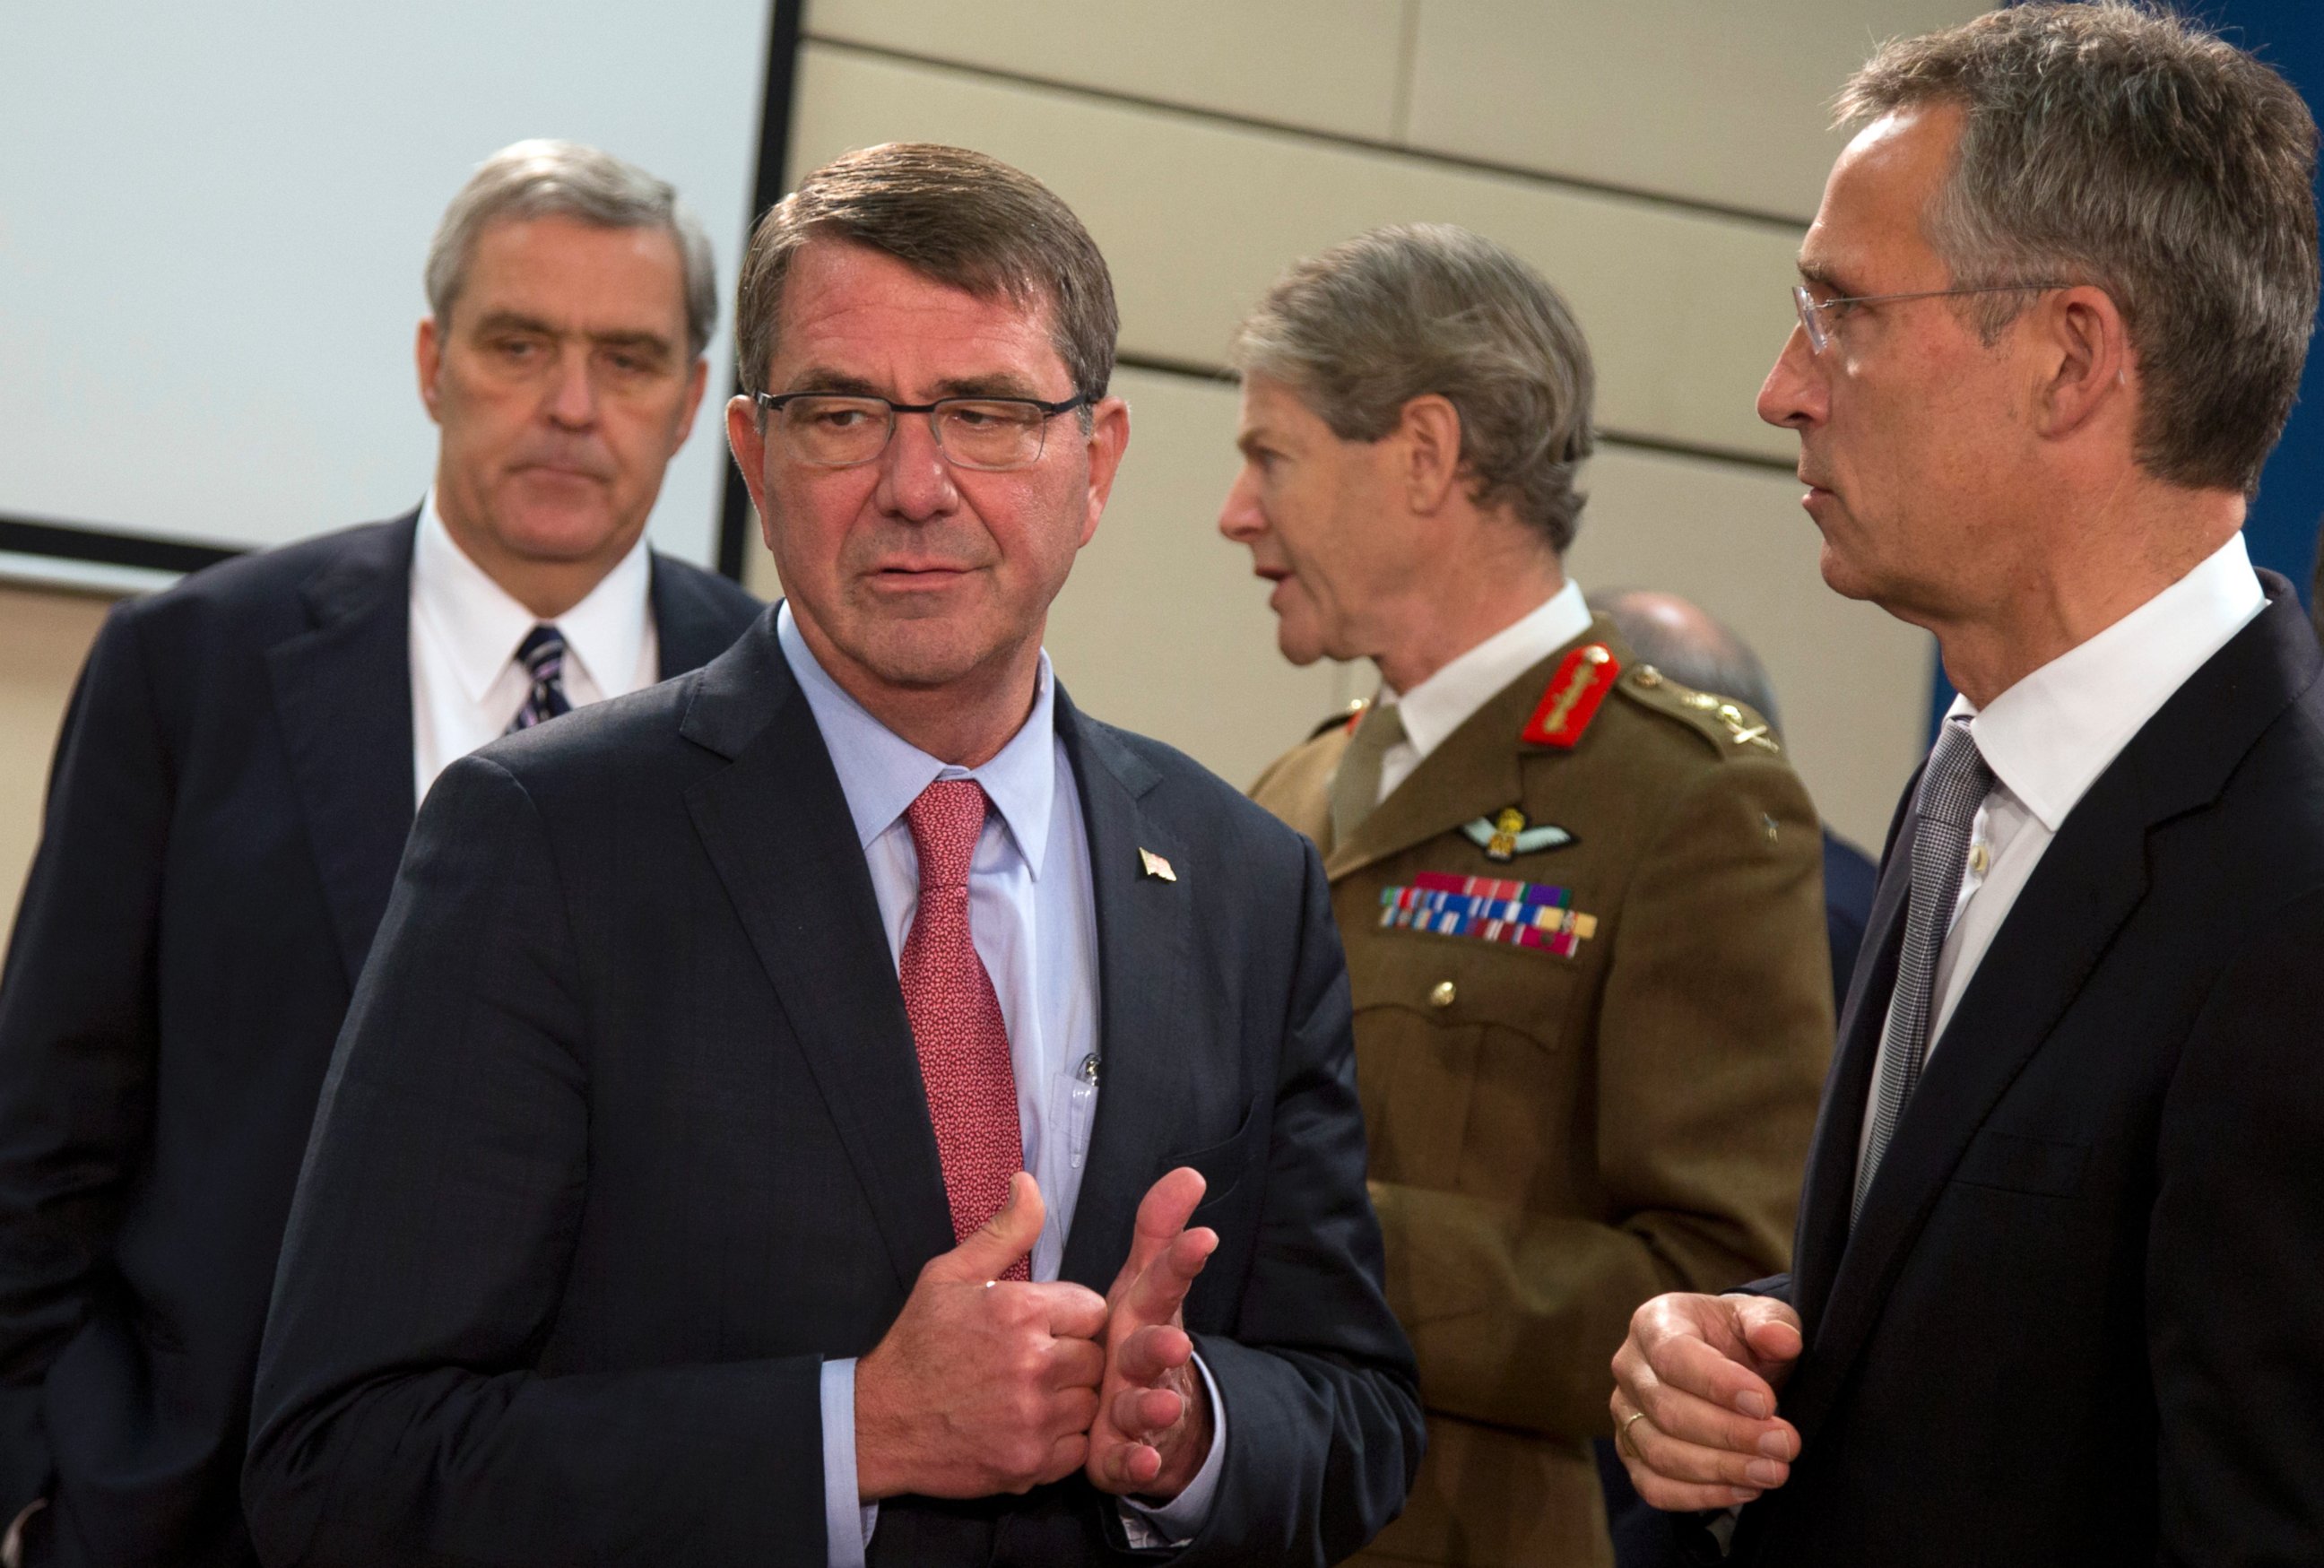 PHOTO: NATO Secretary General Jens Stoltenberg, right, speaks with U.S. Secretary of Defense Ash Carter, second left, during a meeting of the North Atlantic Council at NATO headquarters in Brussels on Oct. 8, 2015. 